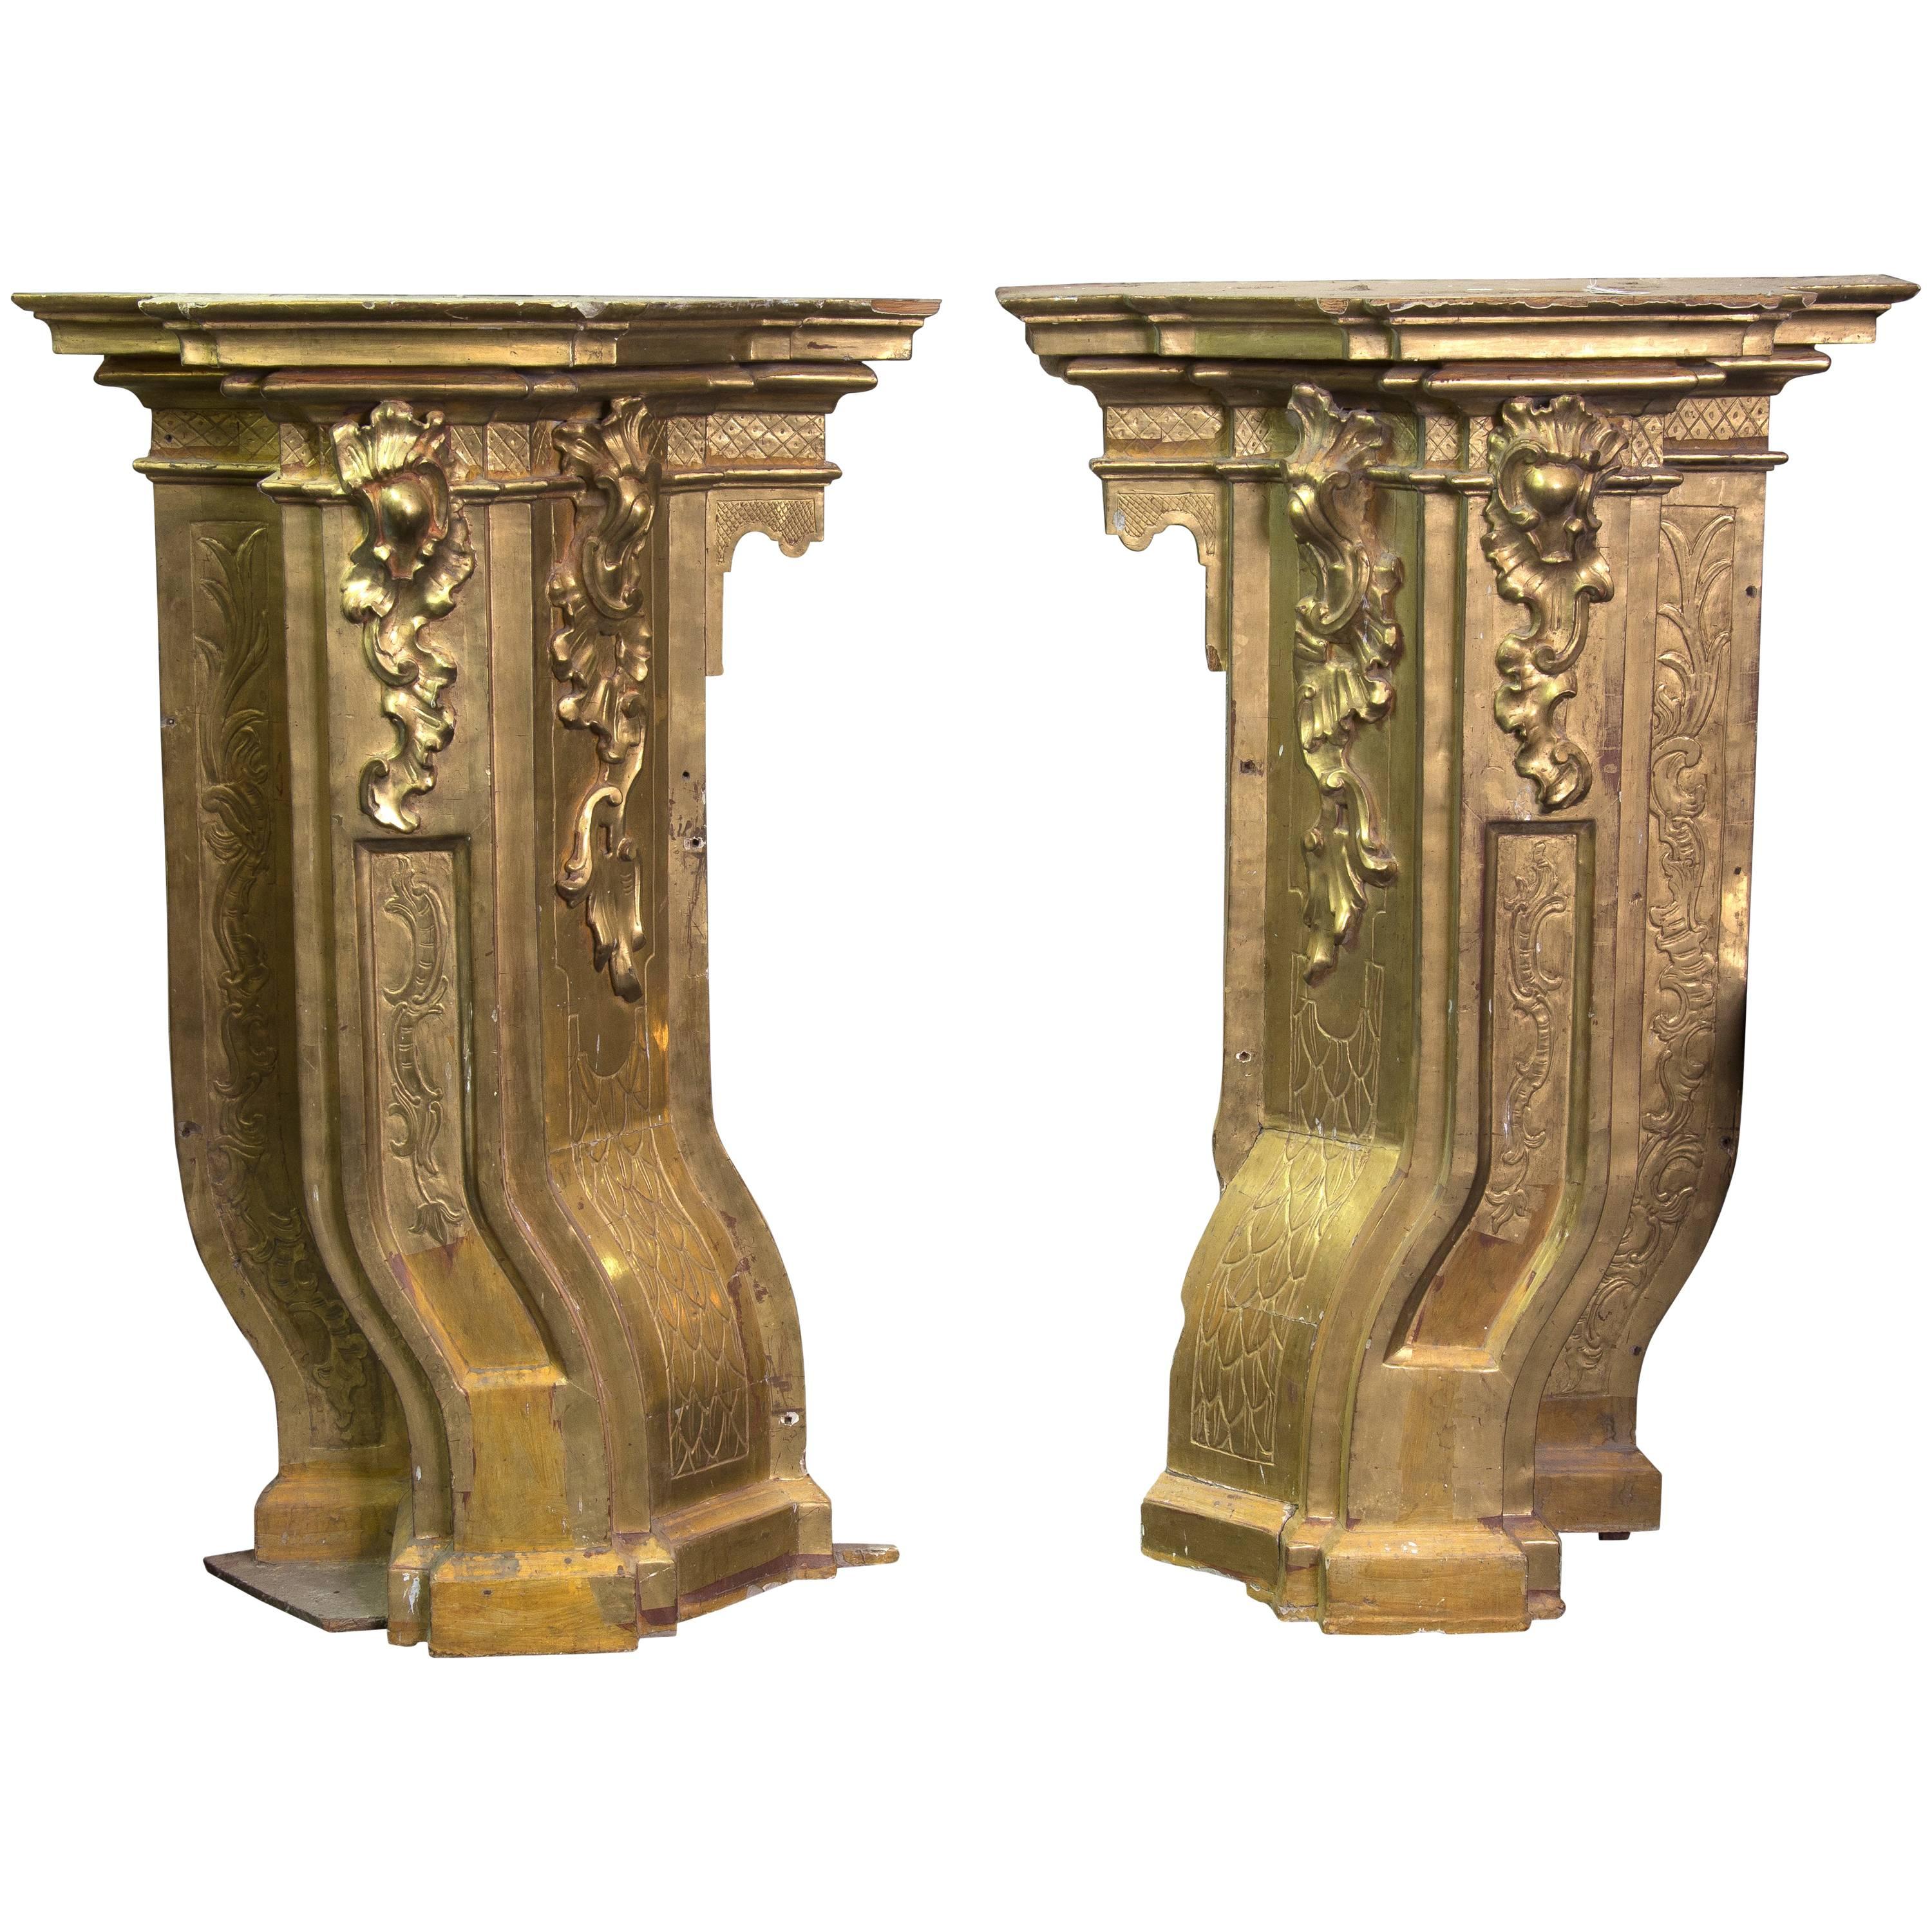 Pair of Brackets in Carved and Gilded Wood, Rococo, 18th Century For Sale